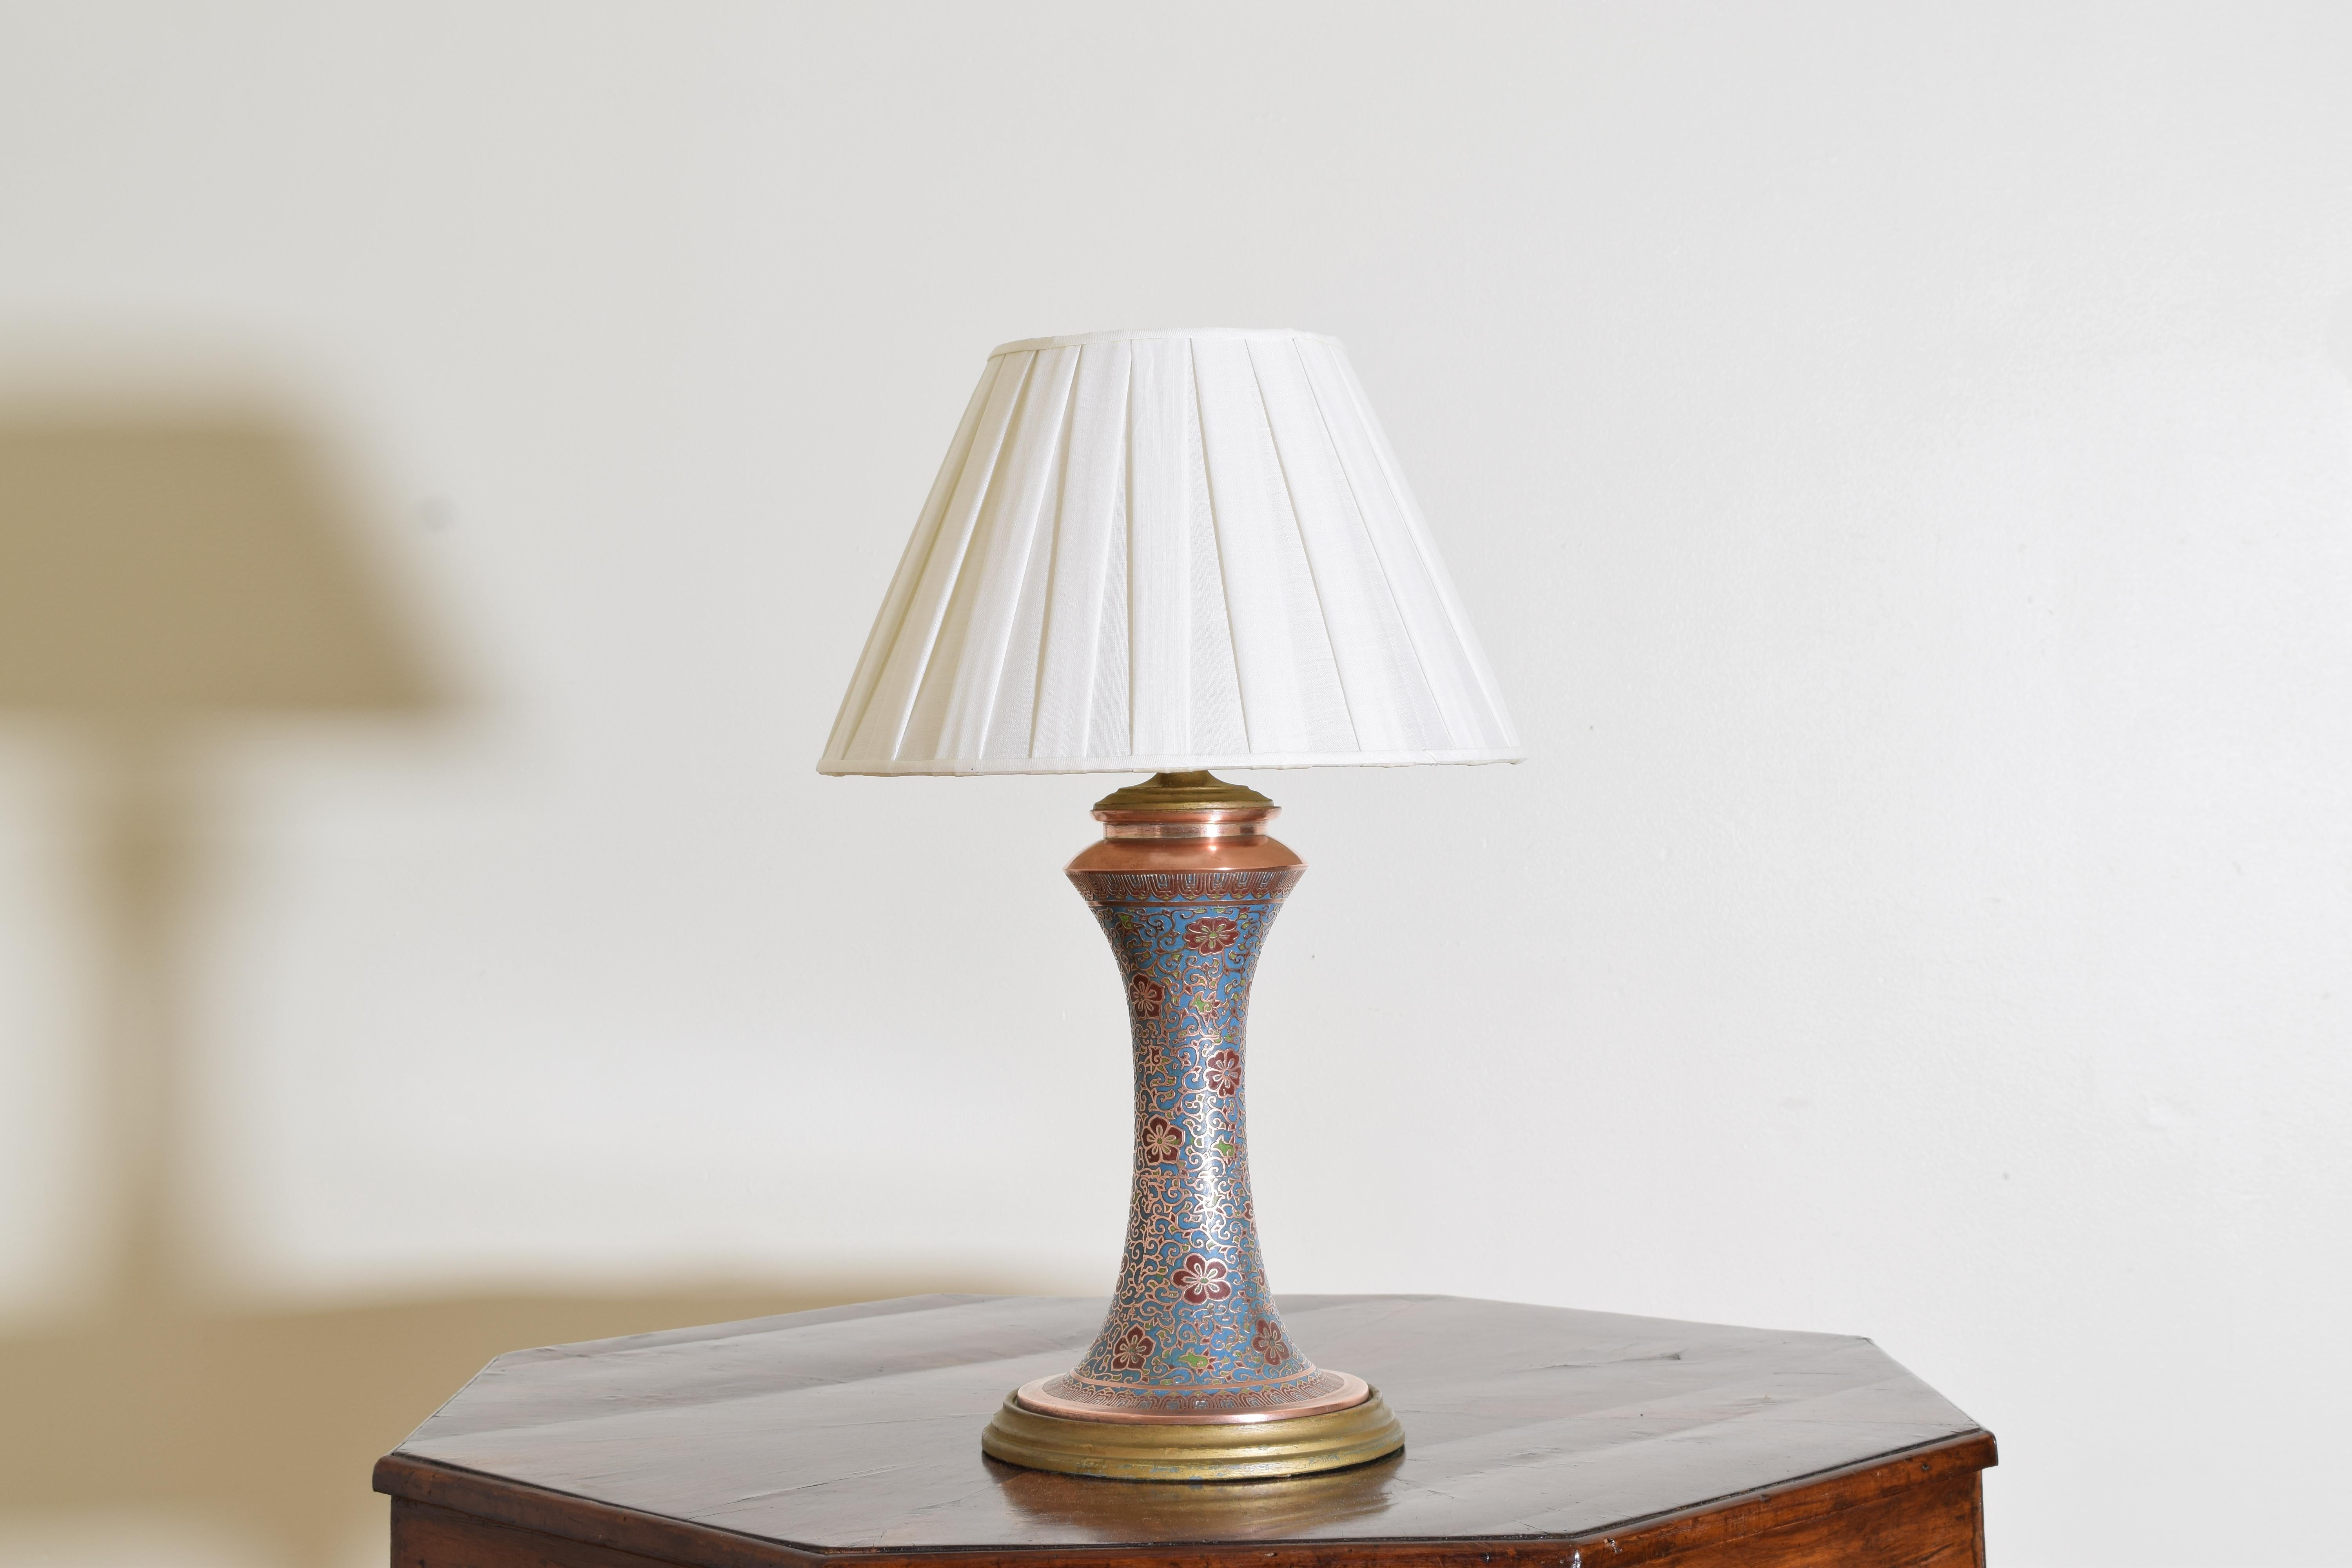 beautifully crafted cloisonne on copper lamp mounted on a giltwood base, vivid enamel colors.